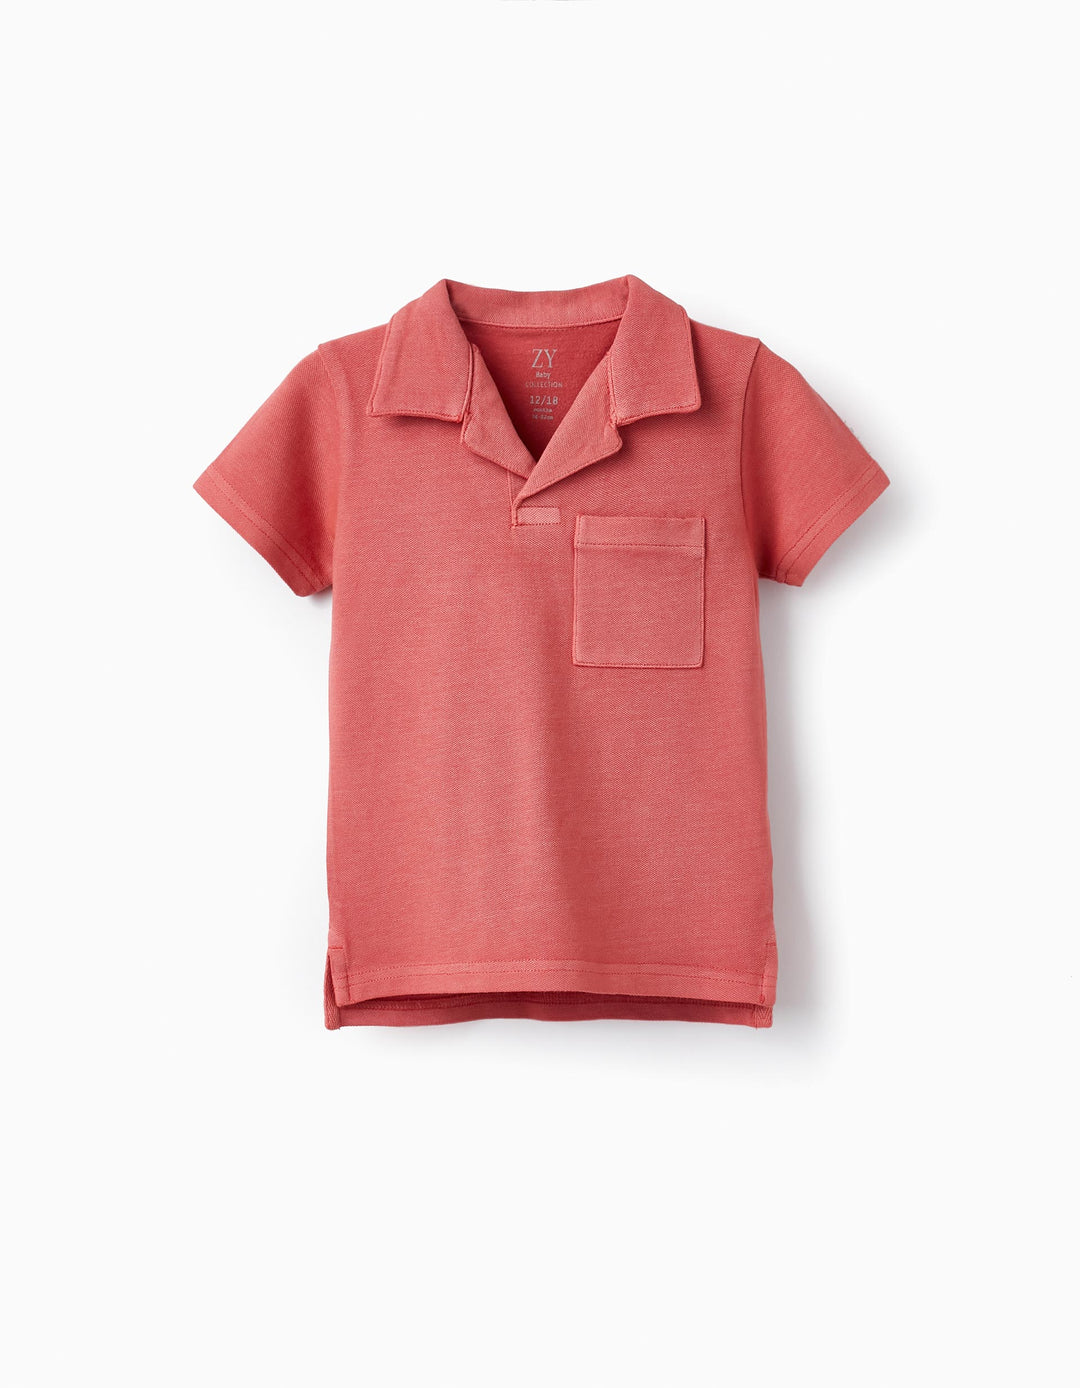 Cotton Piquet Polo Shirts for Baby Boys 'B&S', Red